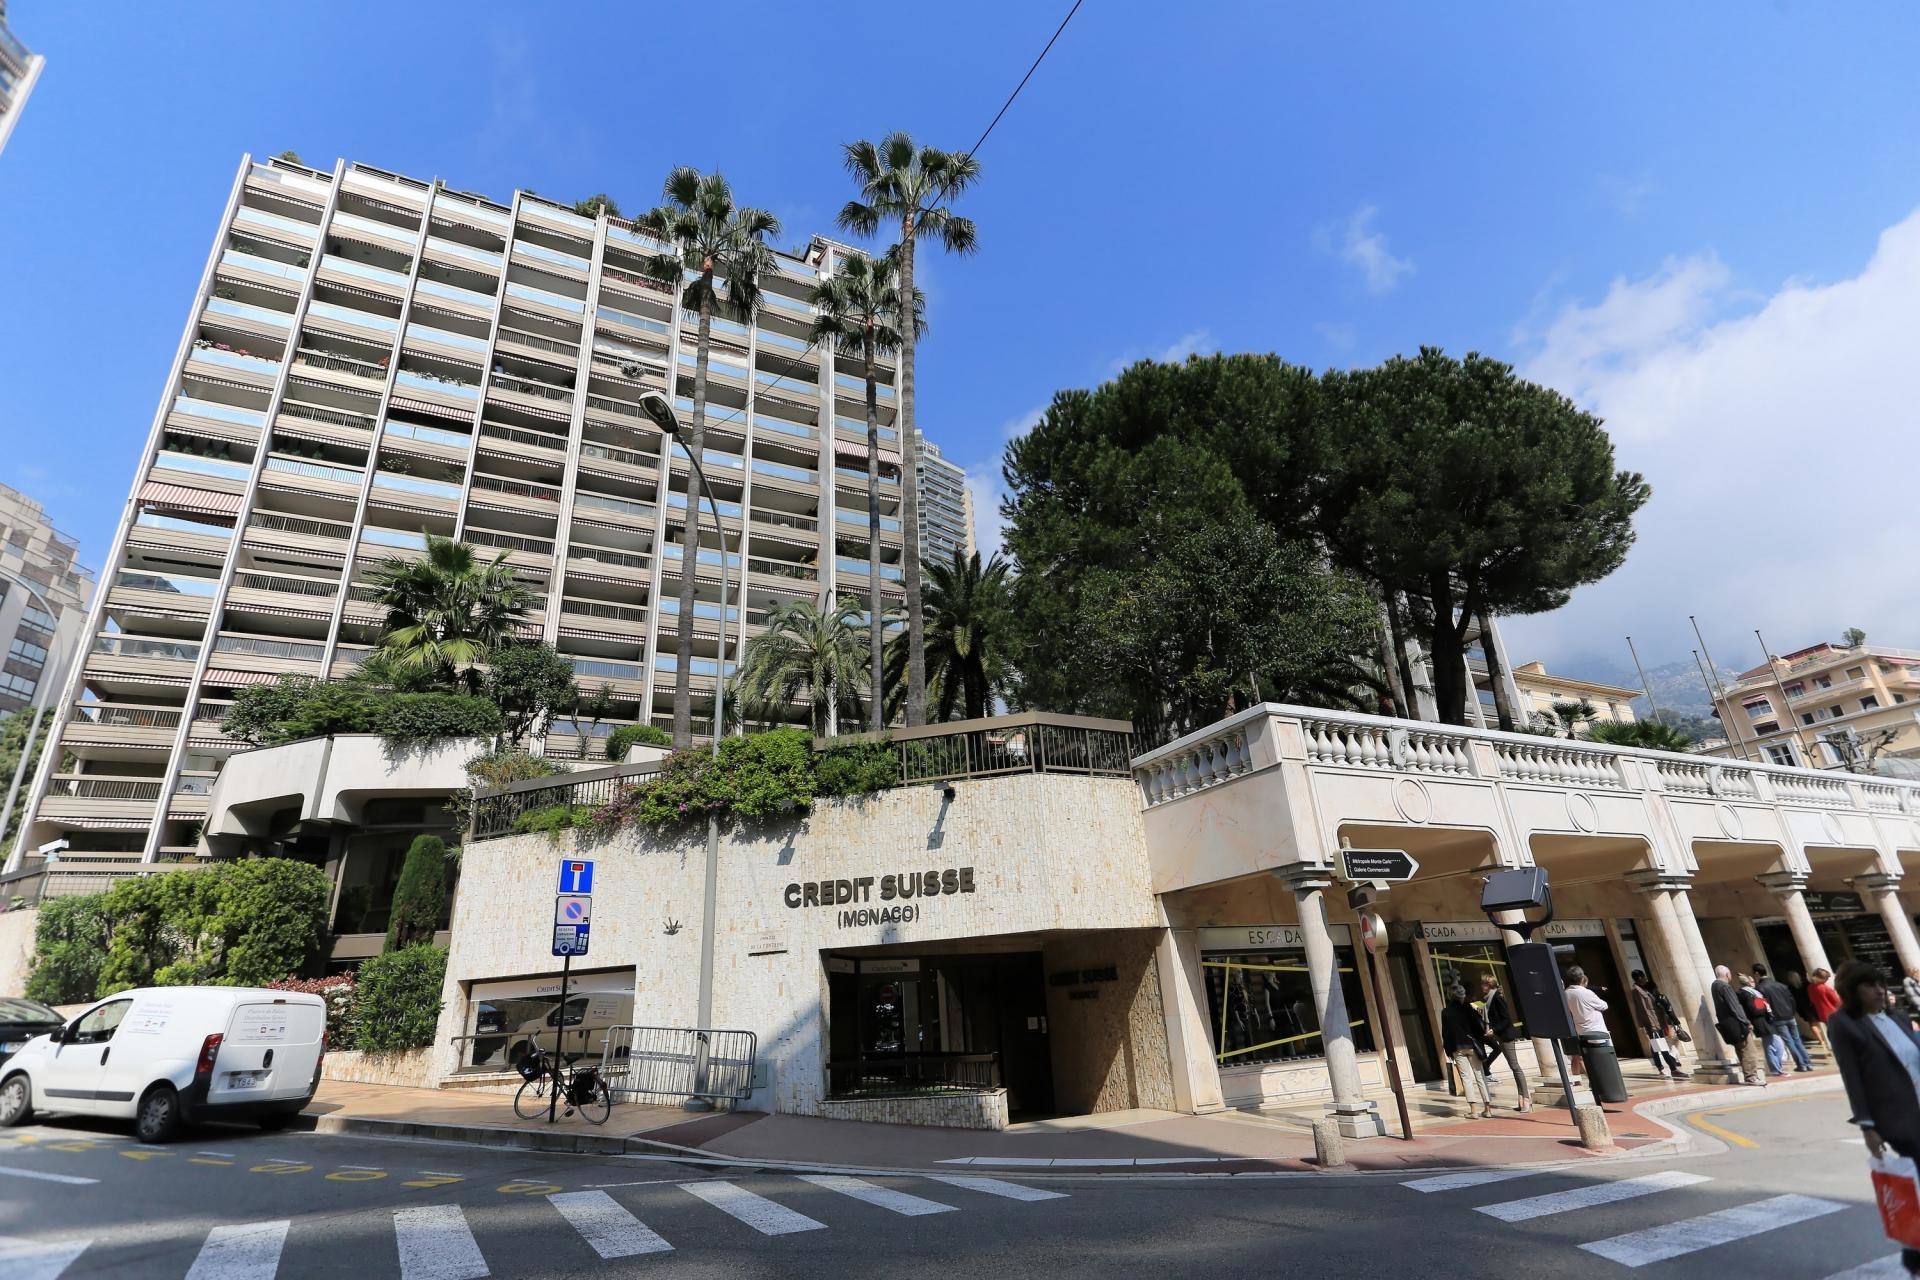 GOLDEN SQUARE - COMMERCIAL ROOM / OFFICE WITH SHOP WINDOW AND 2 CAR PARKS - Uffici in vendita a MonteCarlo